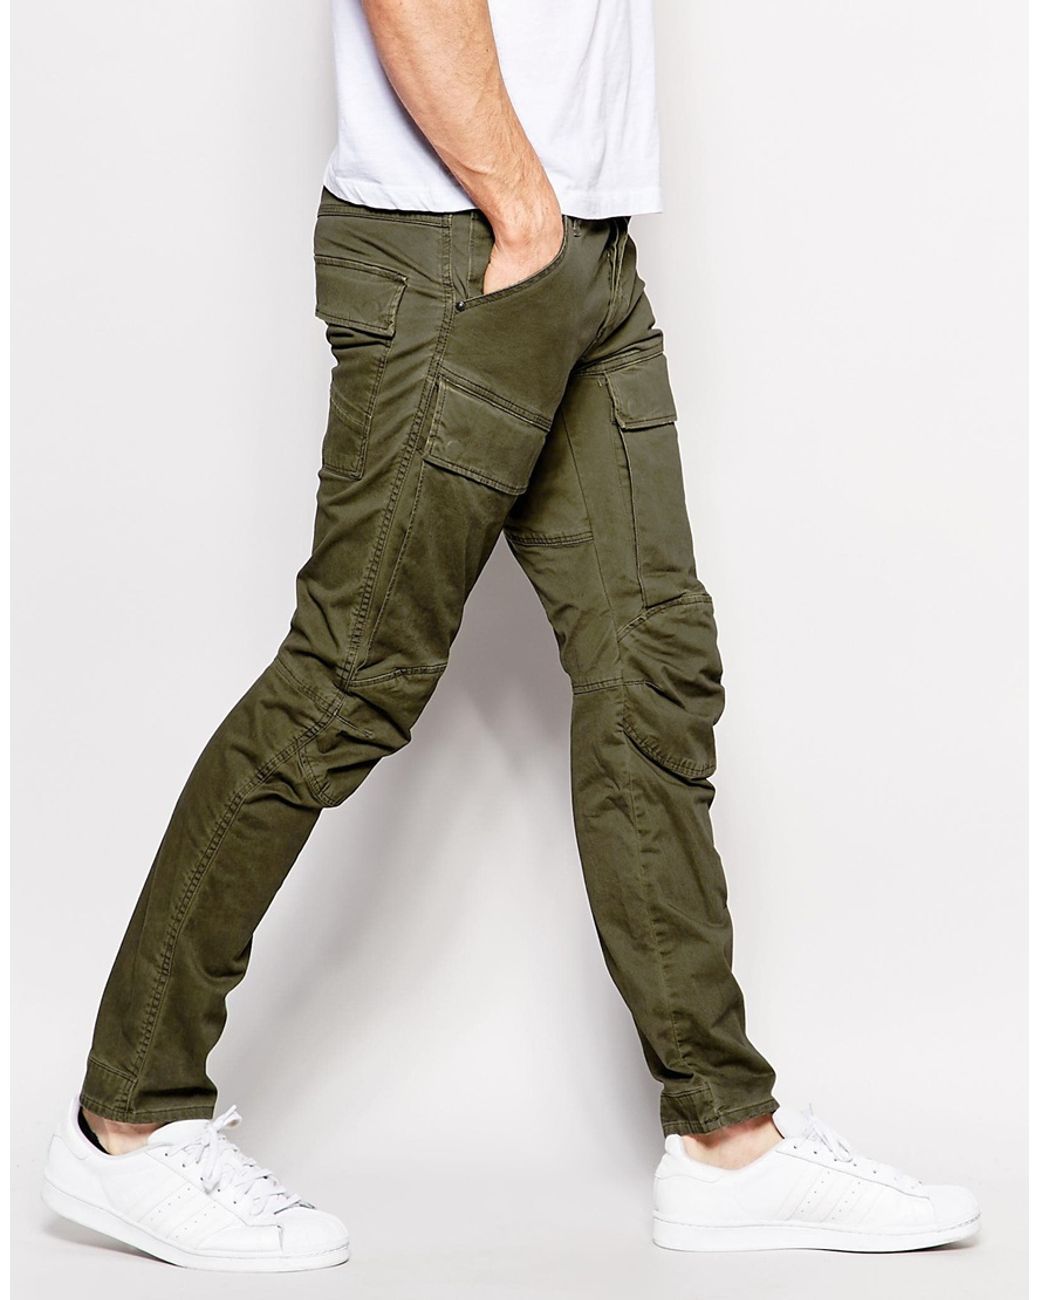 Buy G-Star Cargo Trousers online - Men - 2 products | FASHIOLA.in